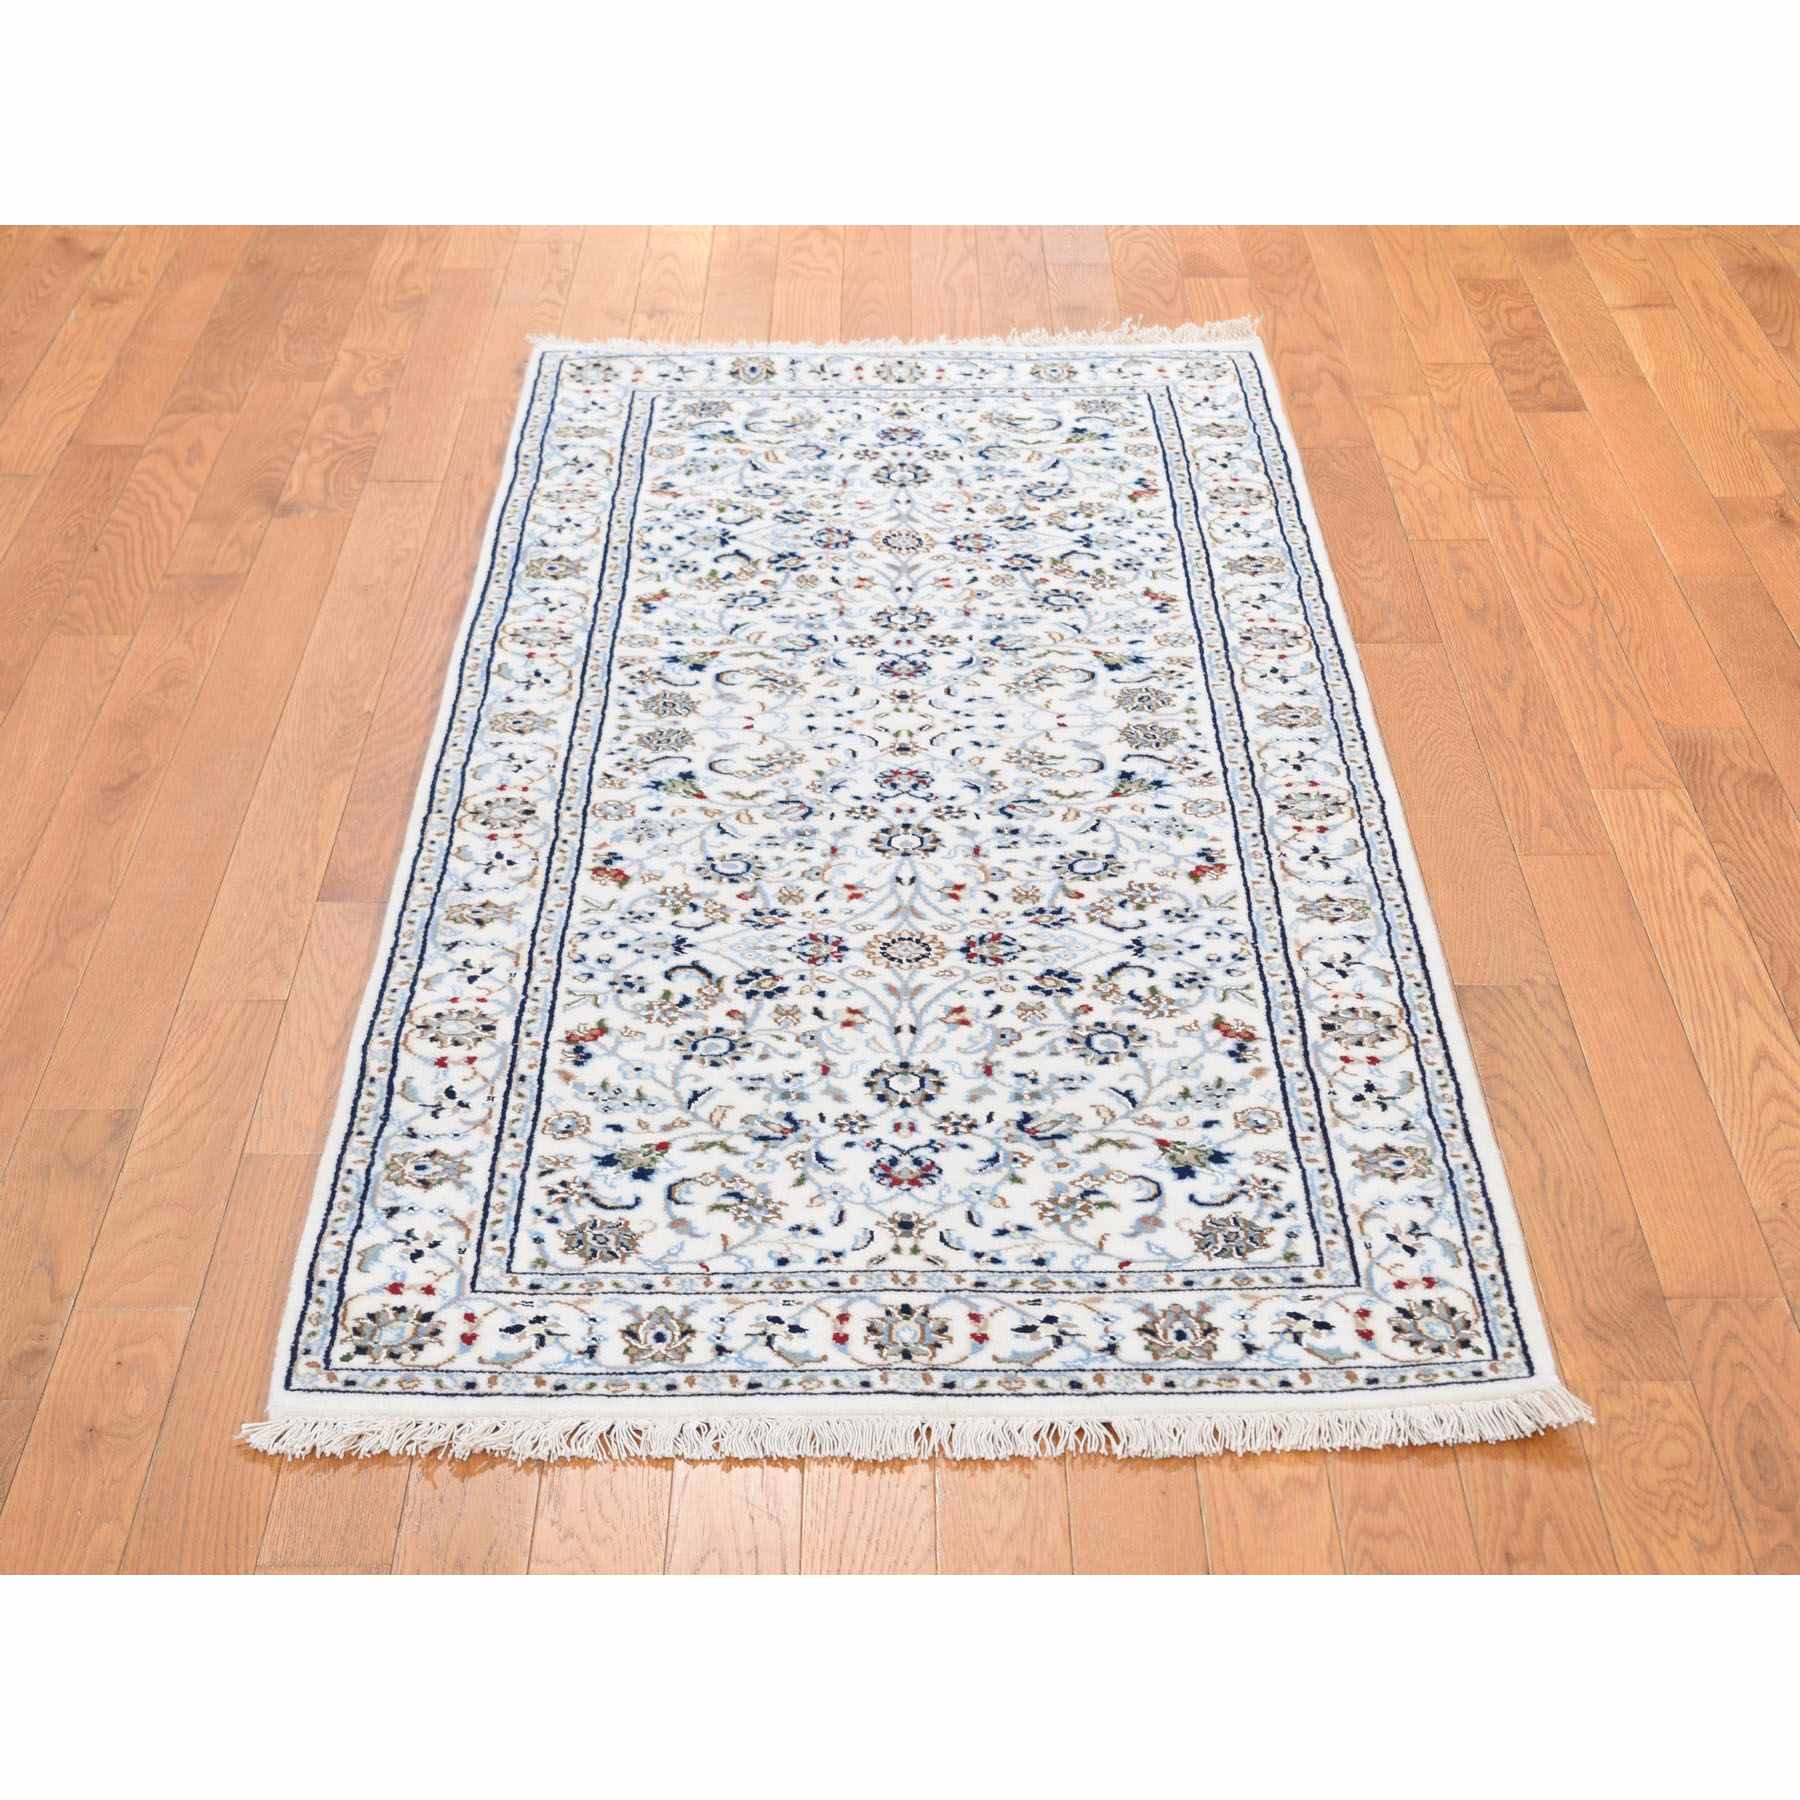 2-9 x6-4  Ivory Nain Wool And Silk All Over Design 250 KPSI Hand Knotted Oriental Rug 